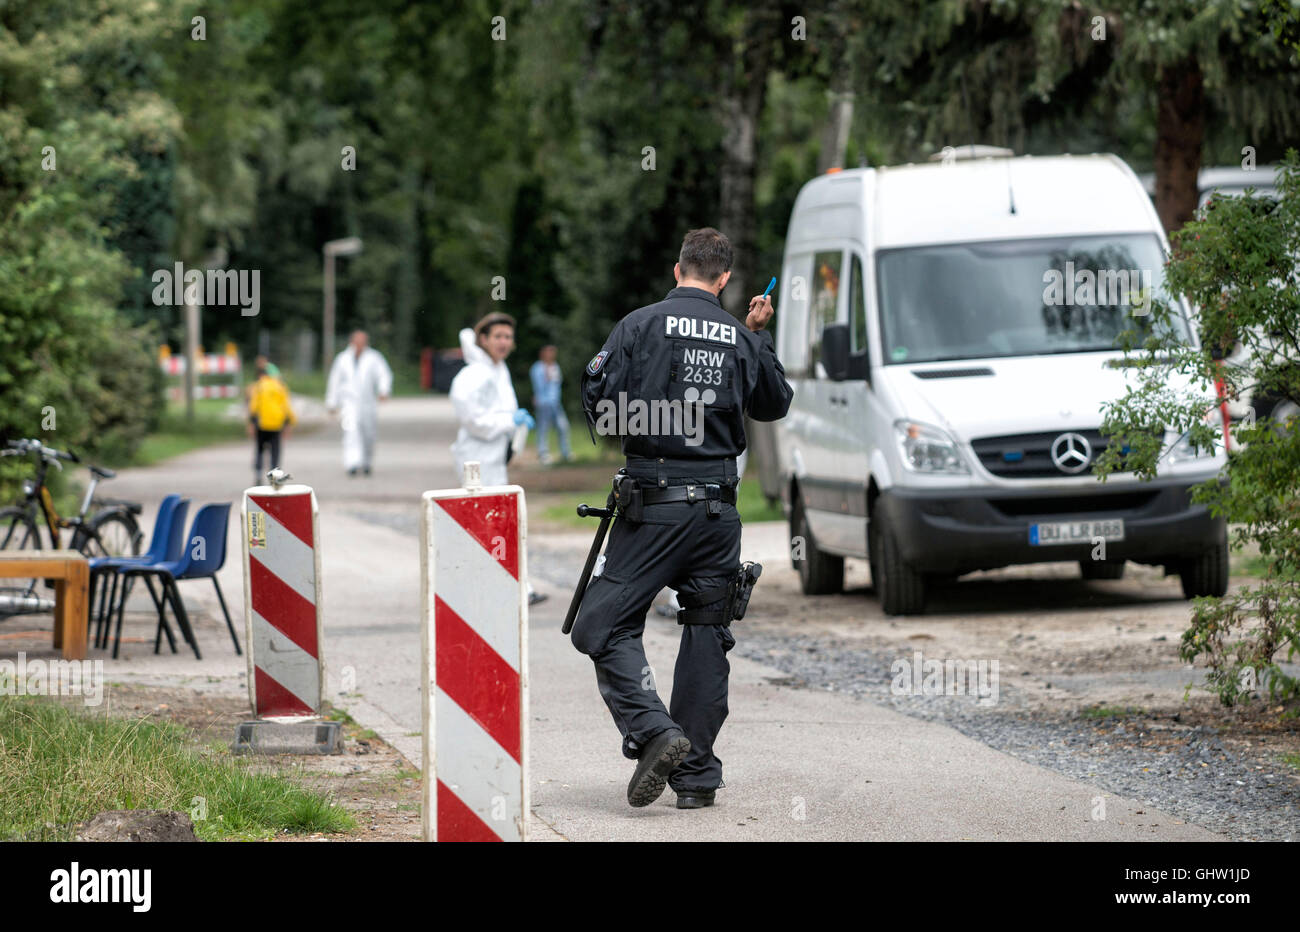 Dinslaken, Germany. 10th Aug, 2016. FILE - Policemen searching the refugee home at Fliehburg in Dinslaken, Germany, 10 August 2016. Due to the suspicion of preparing an explosive attack, the public prosecution of Duisburg arrested three residents of the refugee home in Dinslaken so far. A warrant of arrest is said to be ordered for the three men, senior public prosecutor Nowotsch told Deutsche Presse-Agentur on Thursday. PHOTO: ARNULF STOFFEL/dpa - NO WIRE SERVICE - © dpa/Alamy Live News Stock Photo